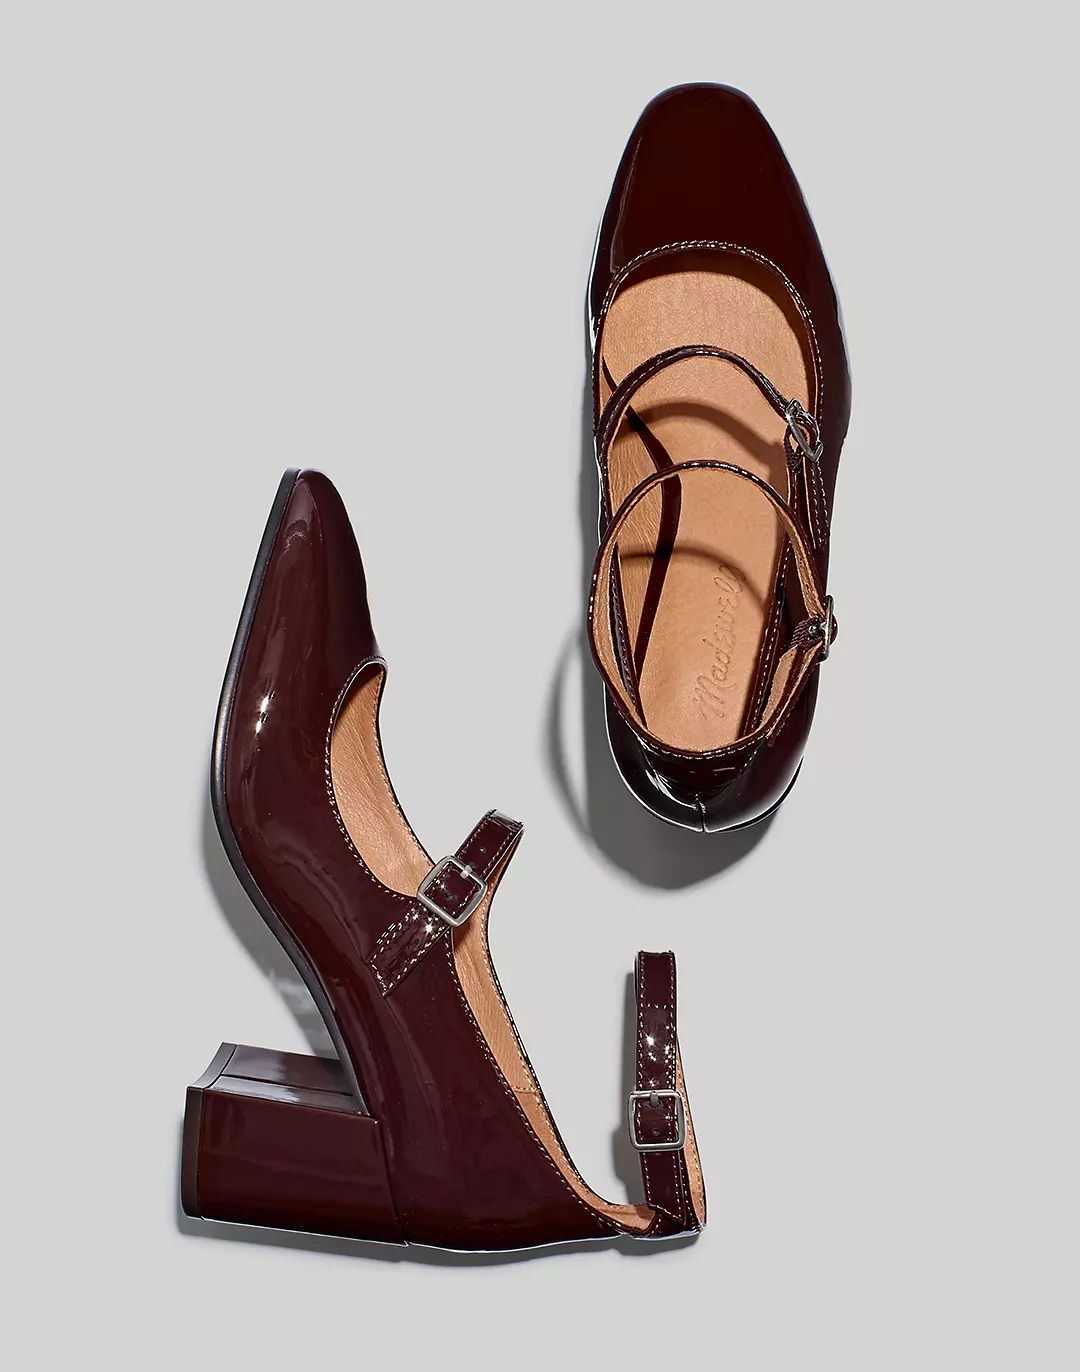 The Maddie Heeled Mary Jane in Patent Leather | Madewell